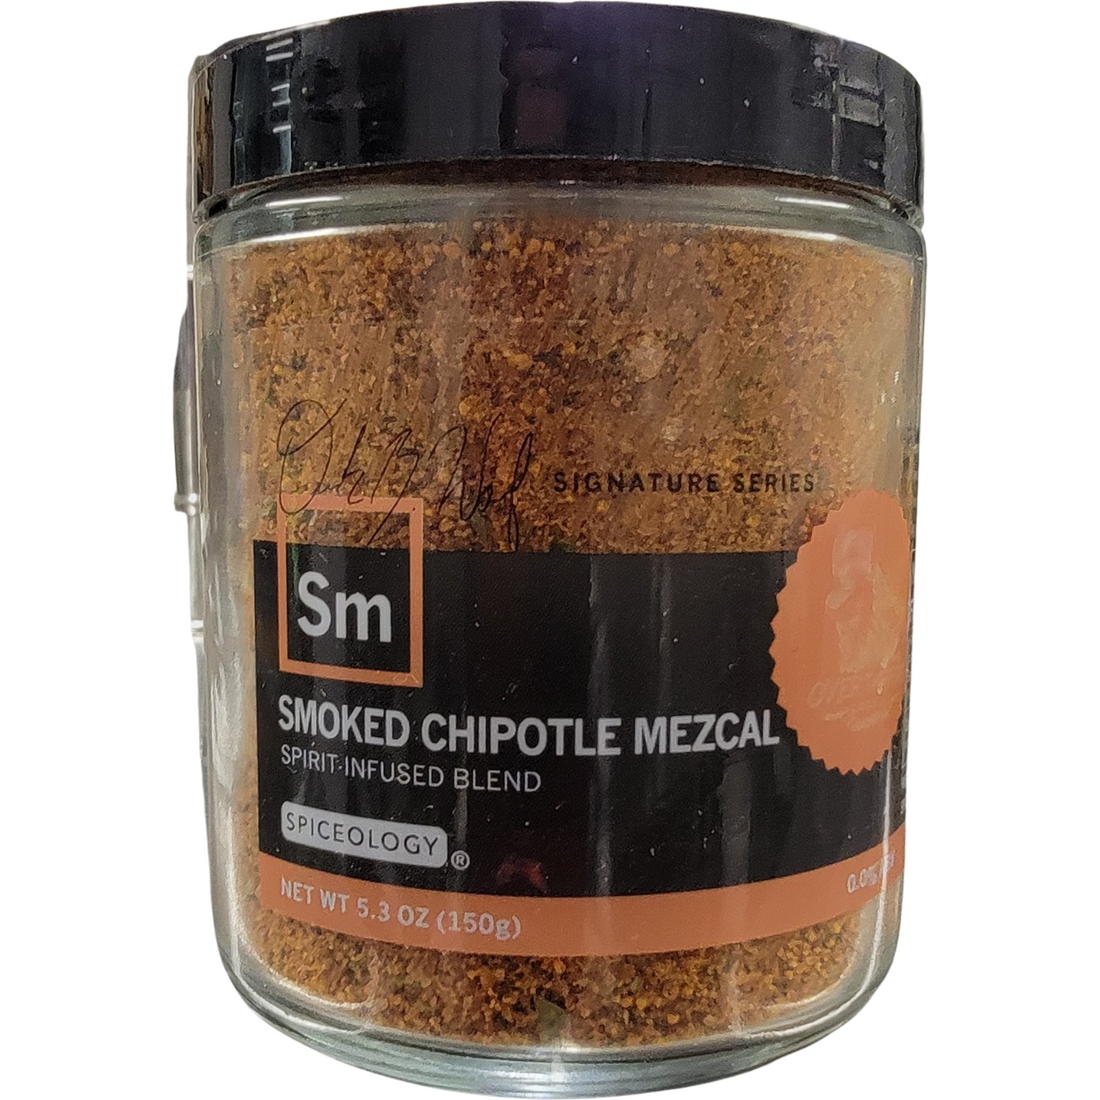 Smoked Chipotle Mezcal Infused Spice Blend